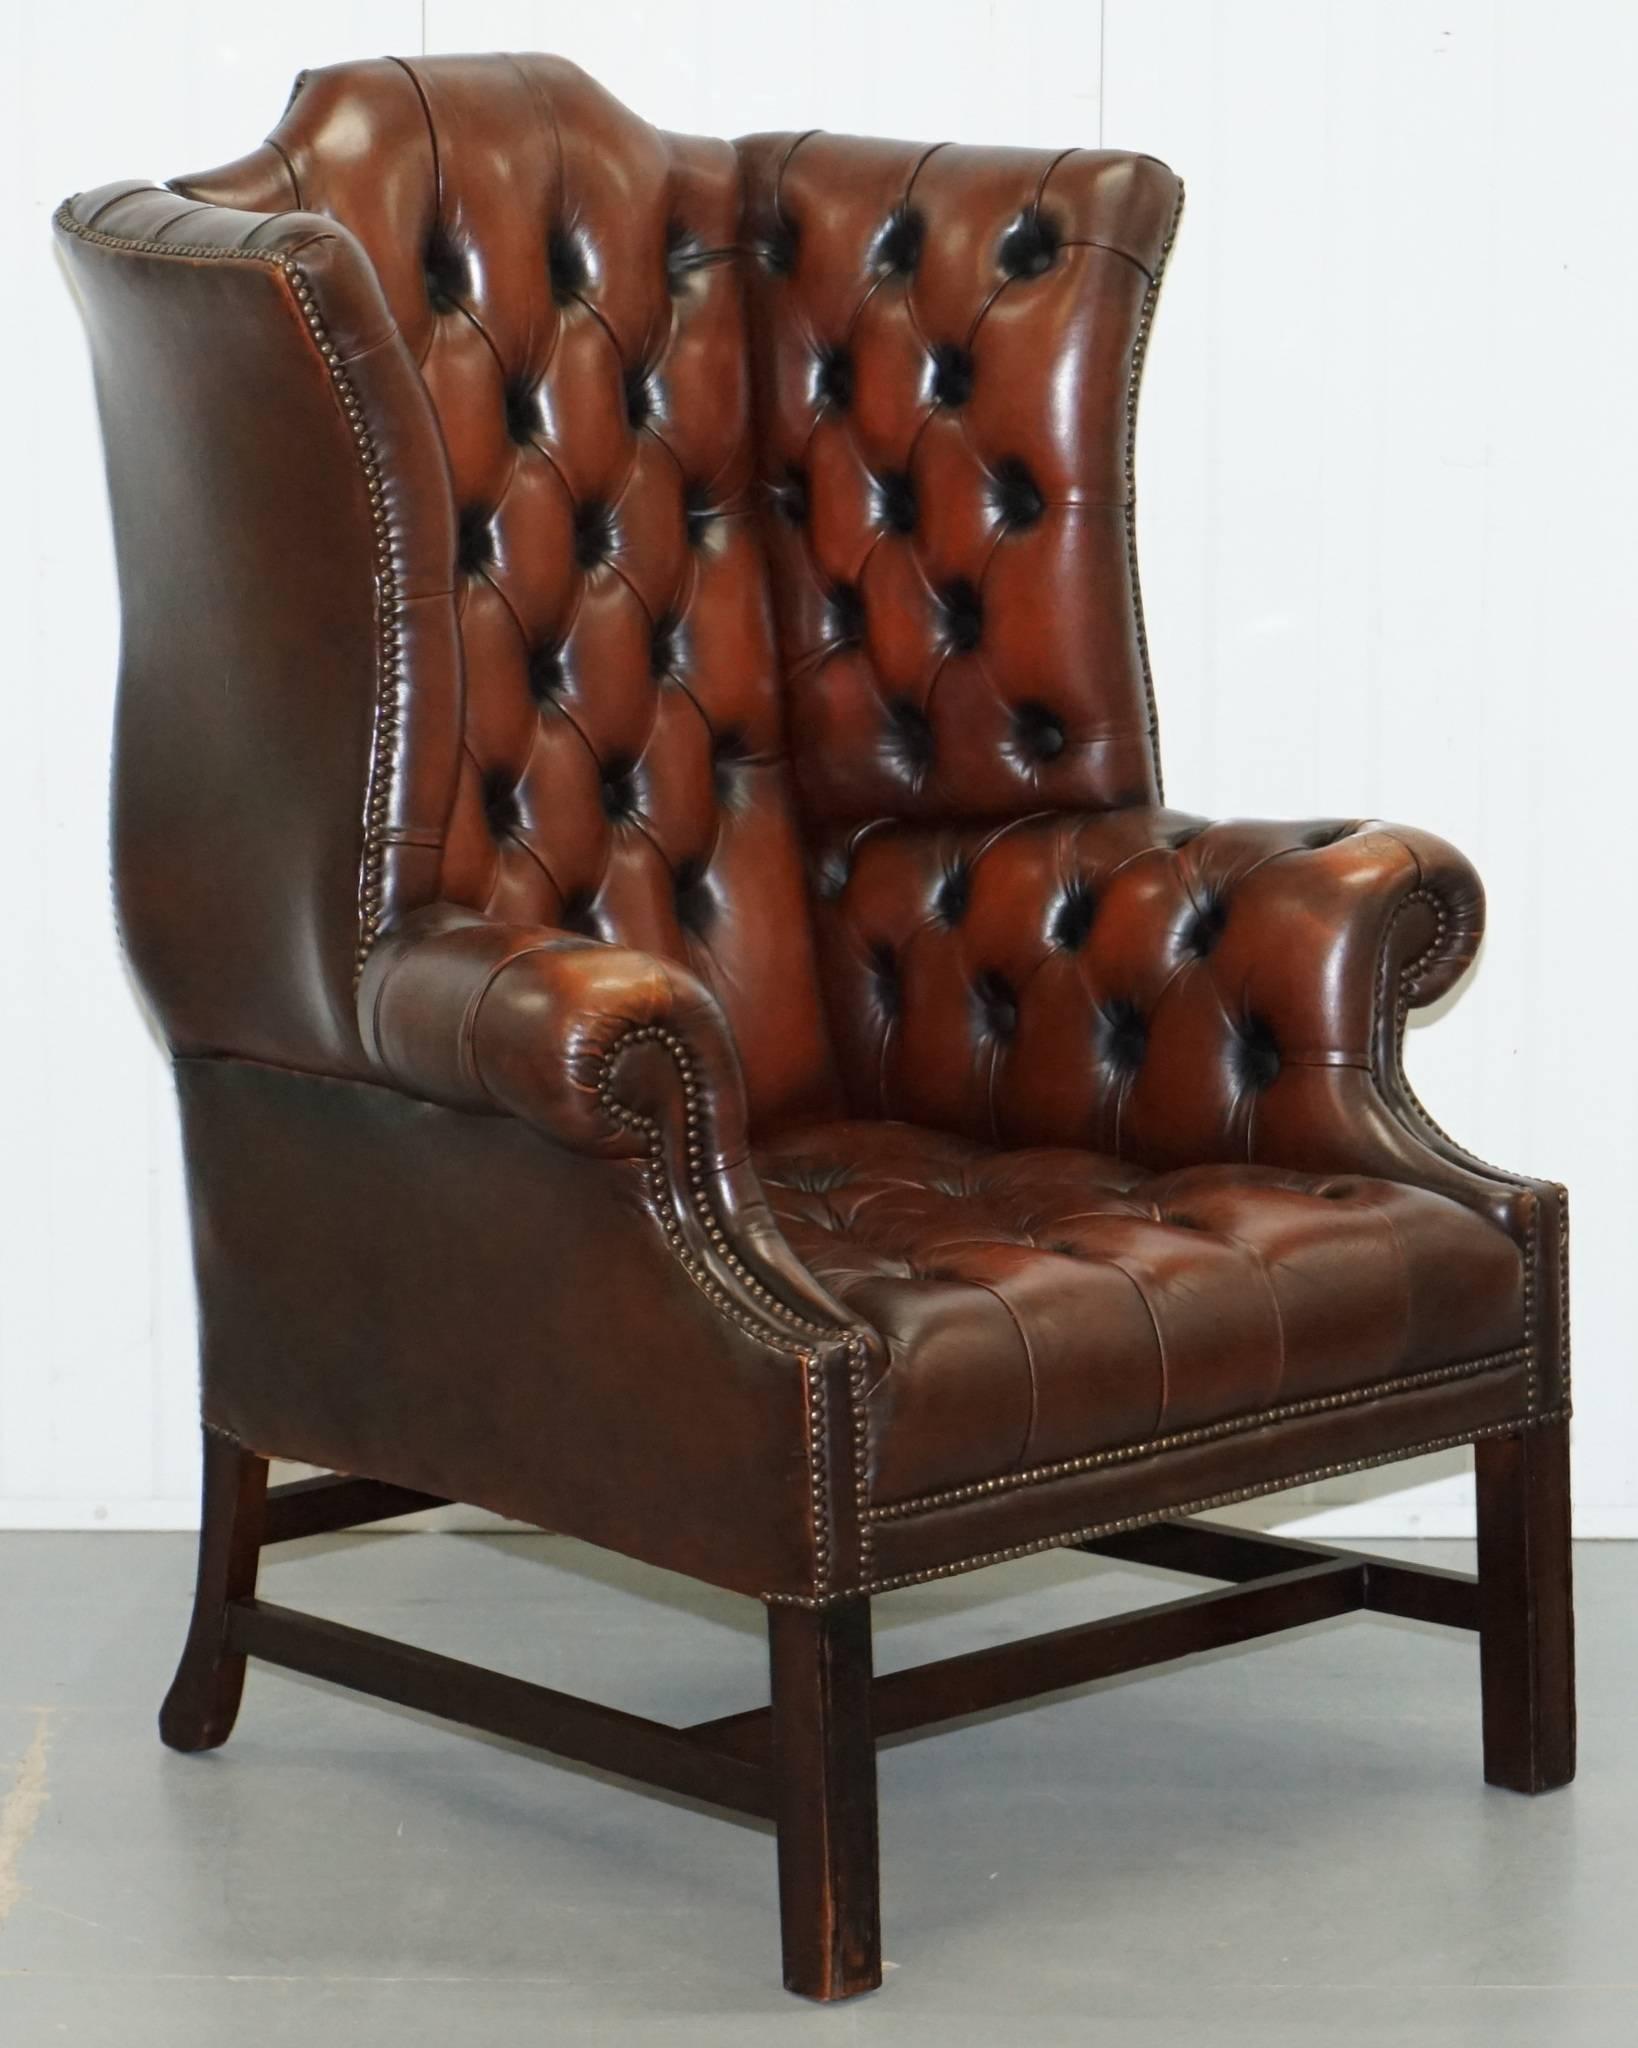 We are delighted to offer for sale lovely antique Georgian style vintage wingback armchair with matching footstool

A very good looking and decorative wingback armchair with the Georgian H framed base. Its called a H frame because if you lay the